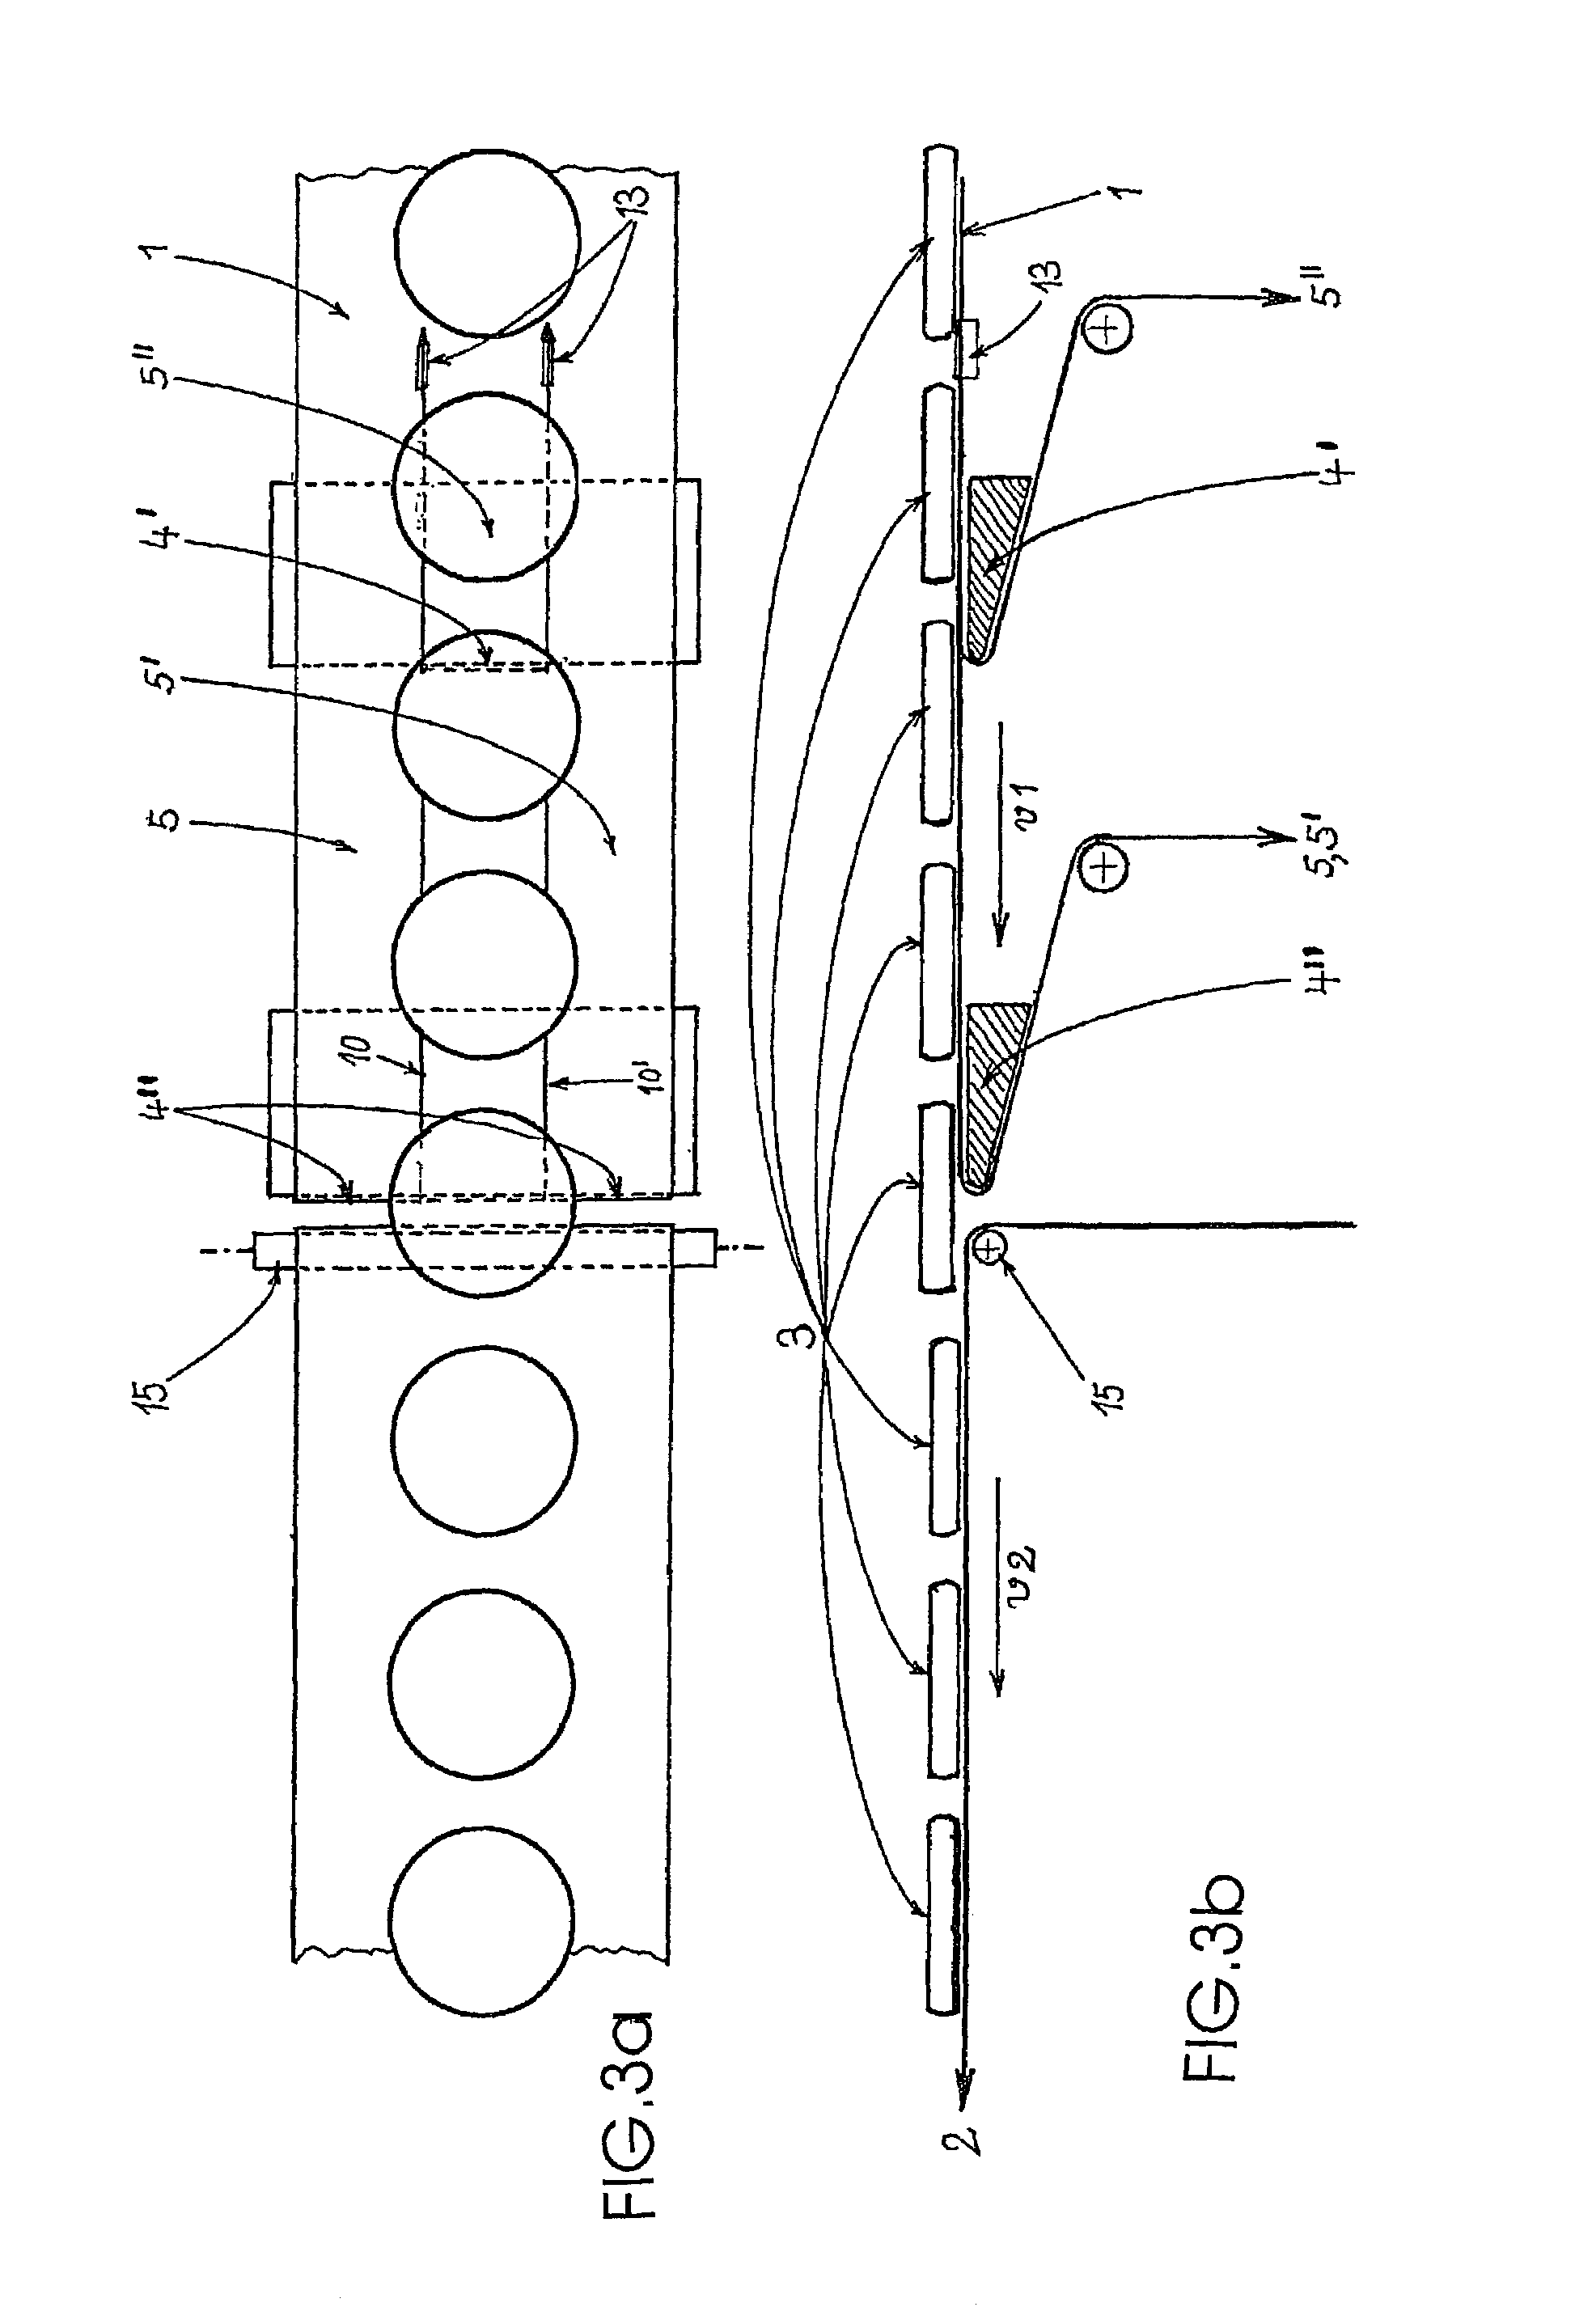 Method and device for dispensing adhesive laminate segments